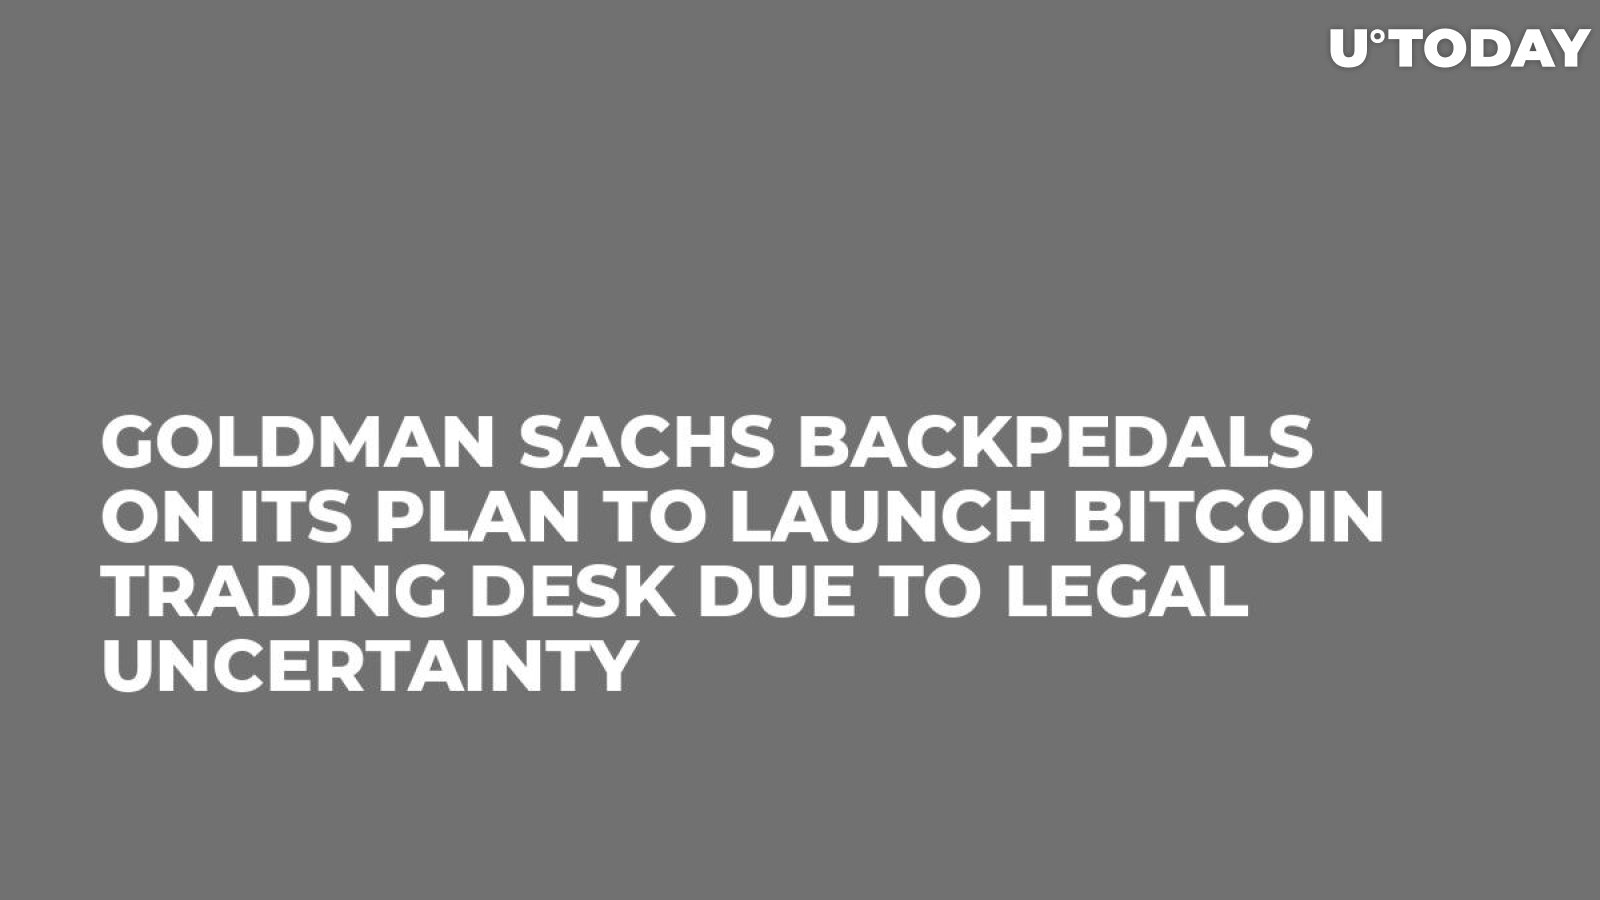 Goldman Sachs Backpedals on Its Plan to Launch Bitcoin Trading Desk Due to Legal Uncertainty